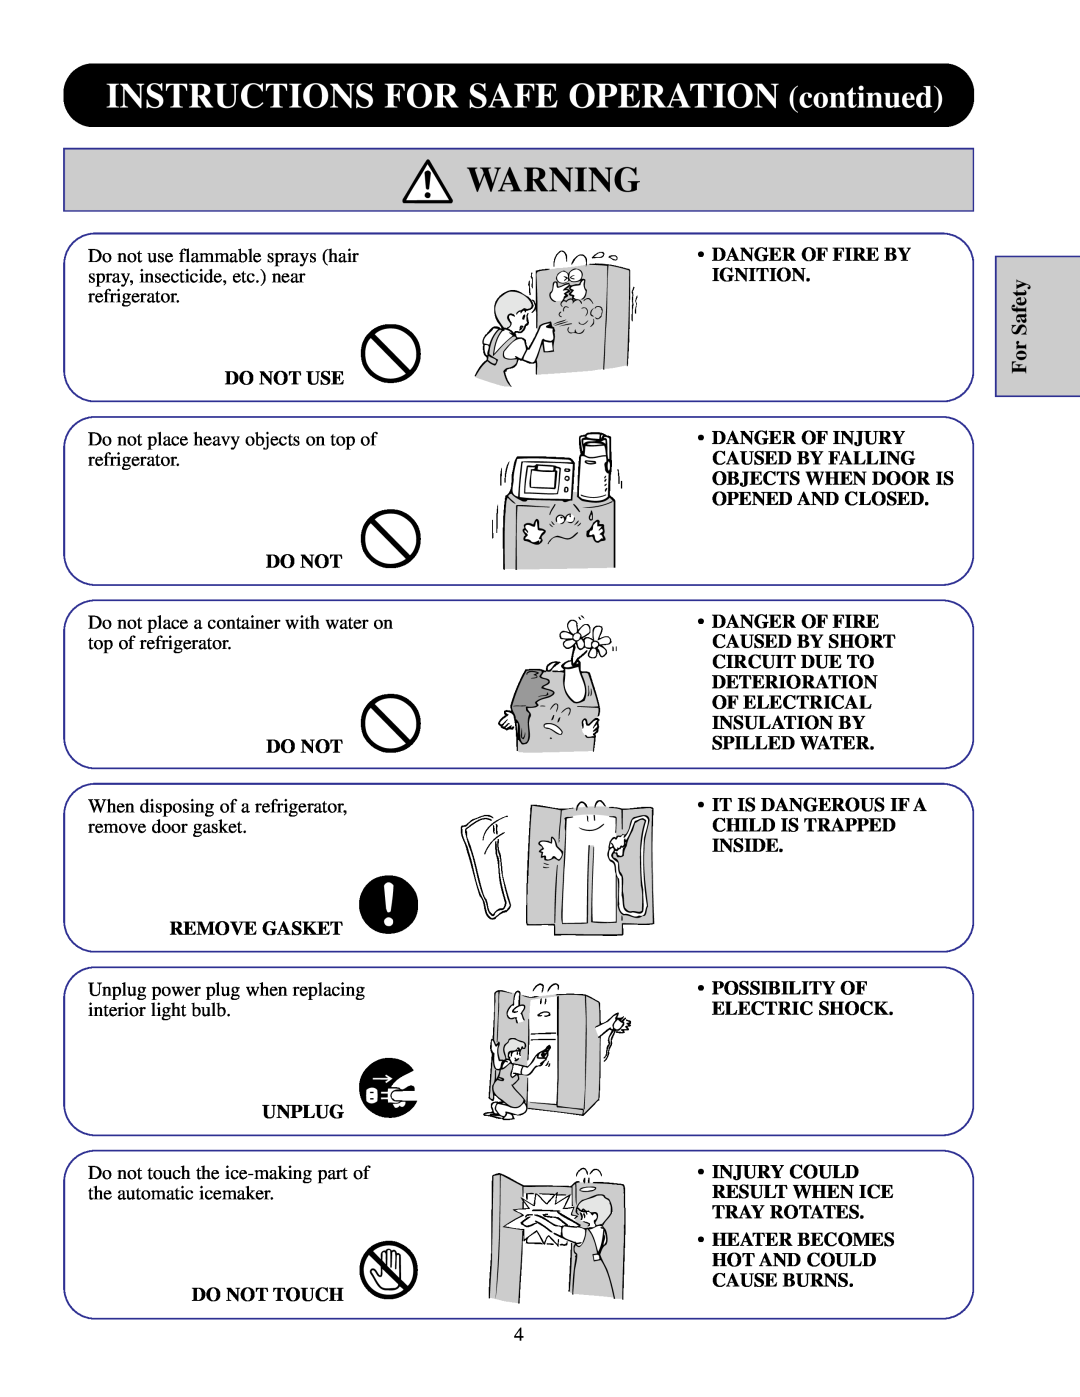 GE TFJ30PR, TPJ24PR, TPJ24BR, TPJ24PF, TFJ28PR manual INSTRUCTIONS FOR SAFE OPERATION continued, For Safety, Danger Of Fire By 